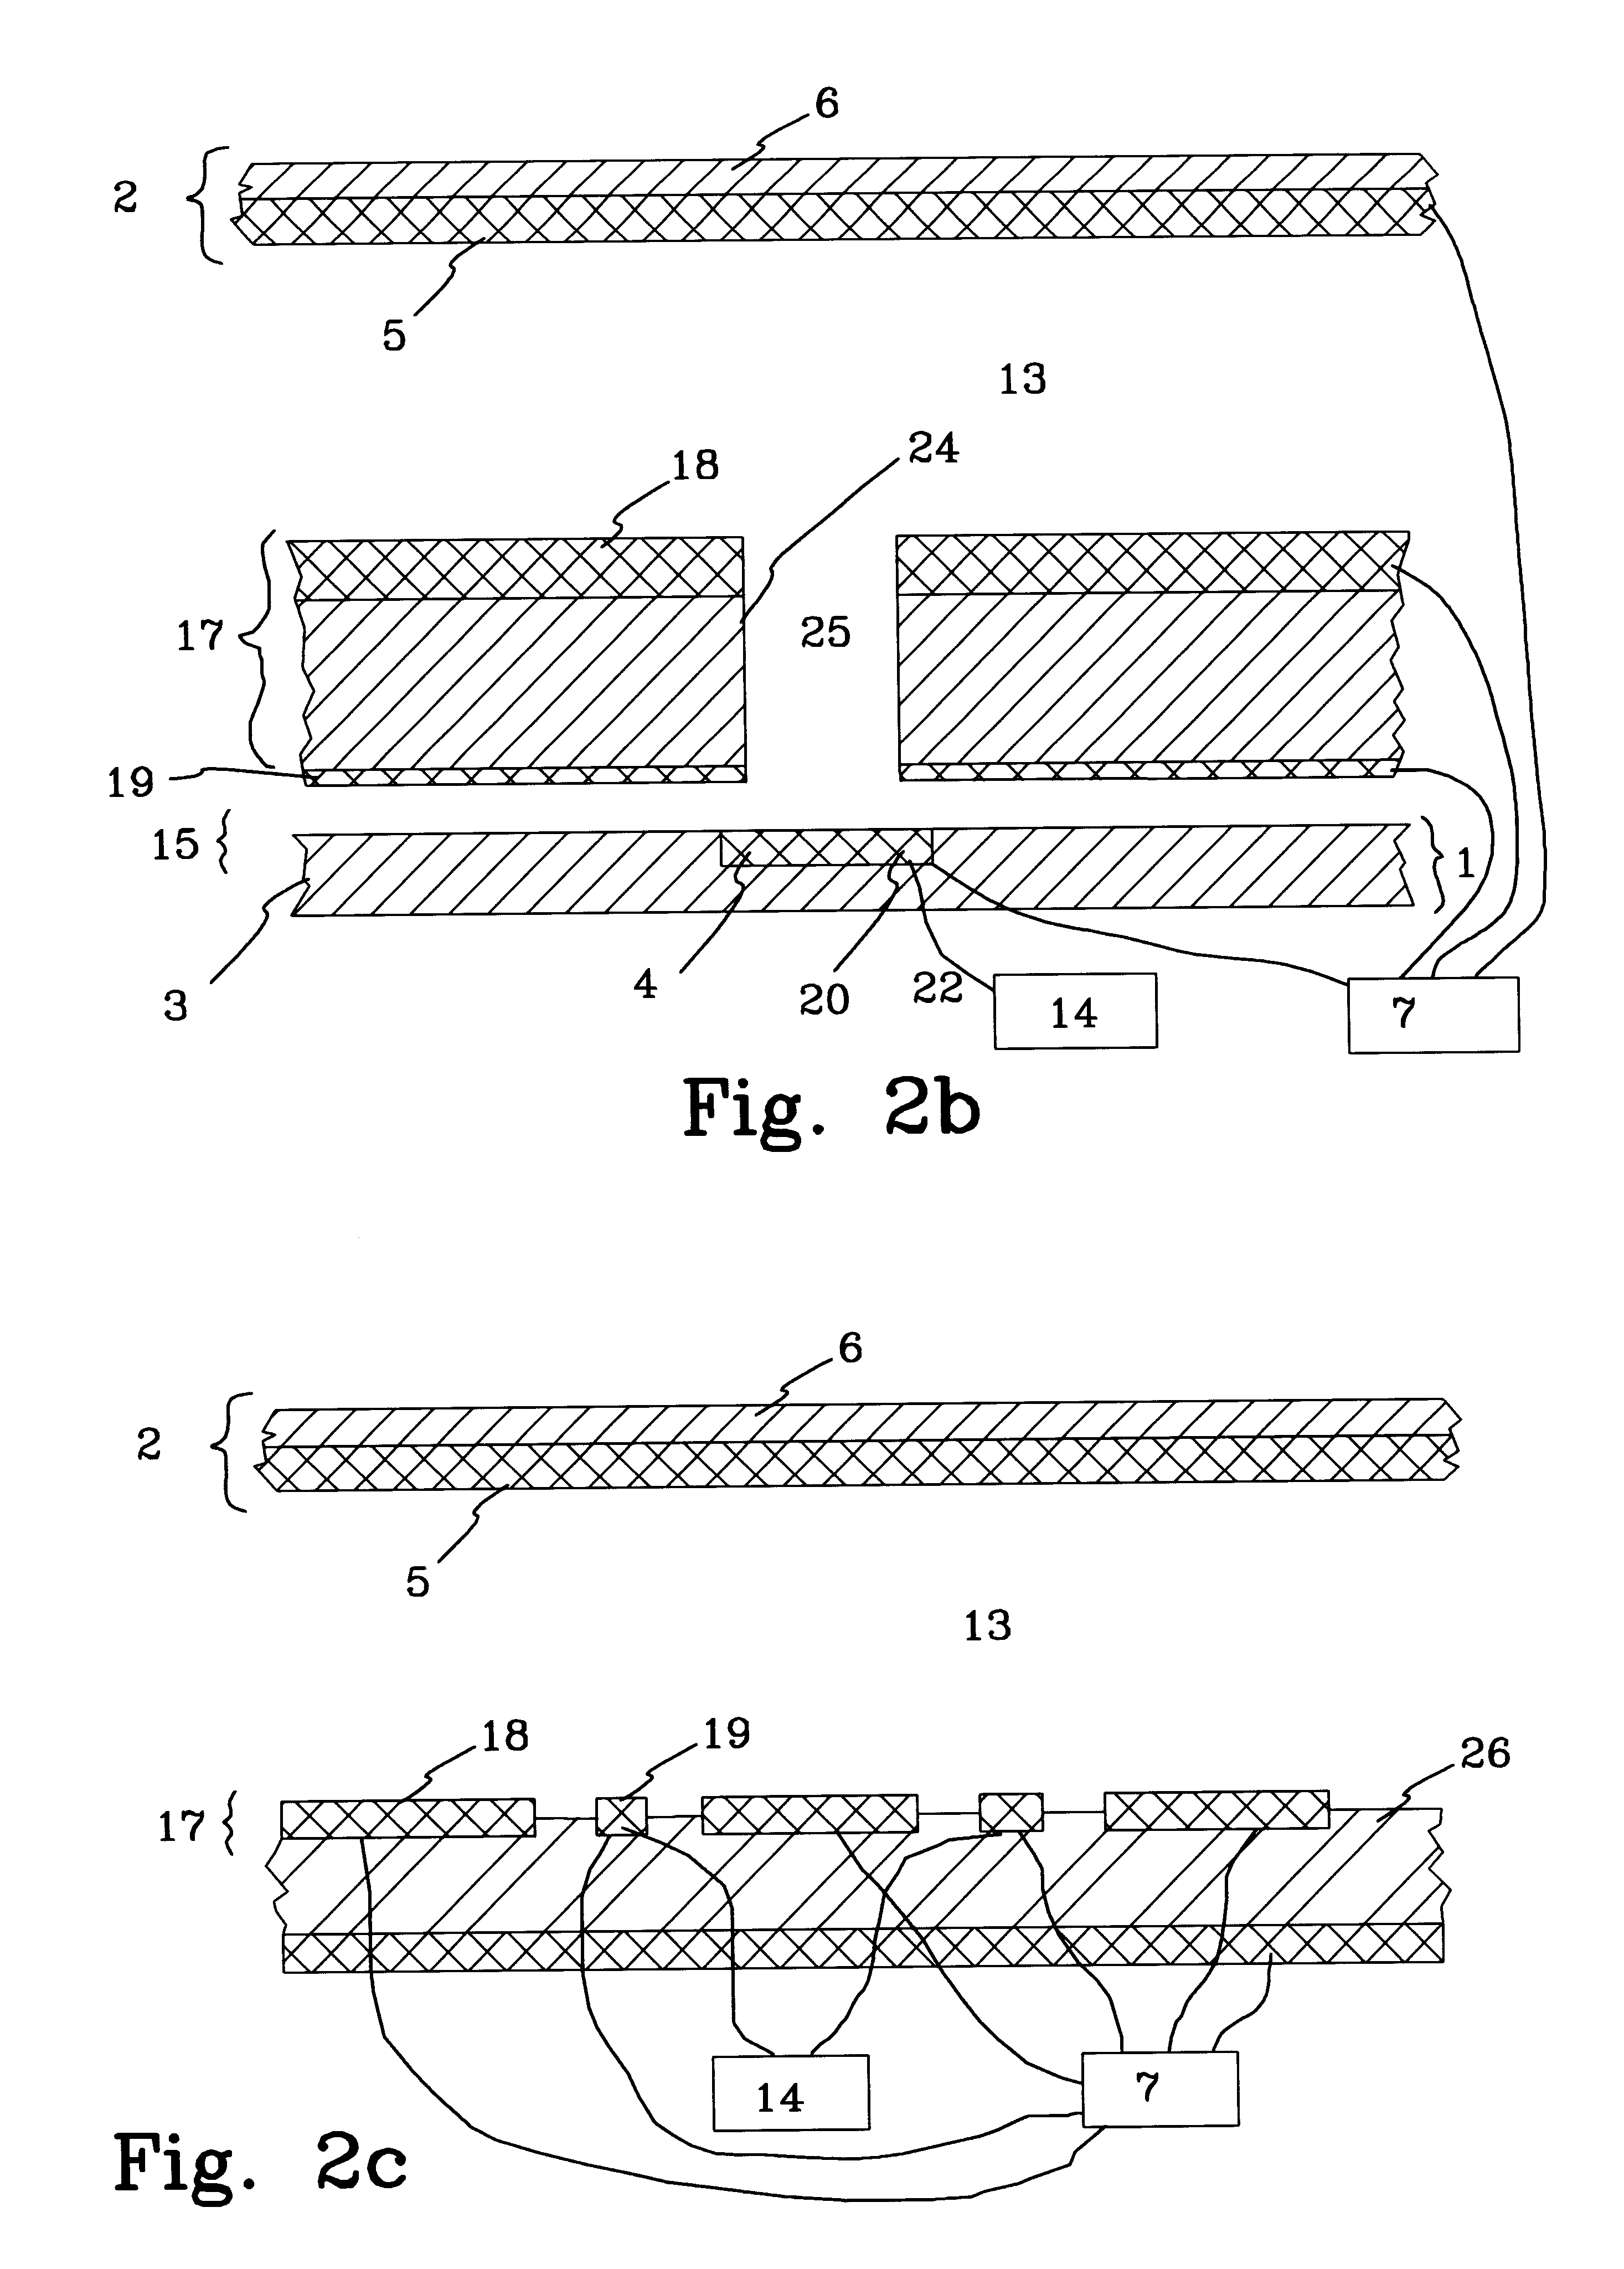 Radiation detector and an apparatus for use in planar beam radiography